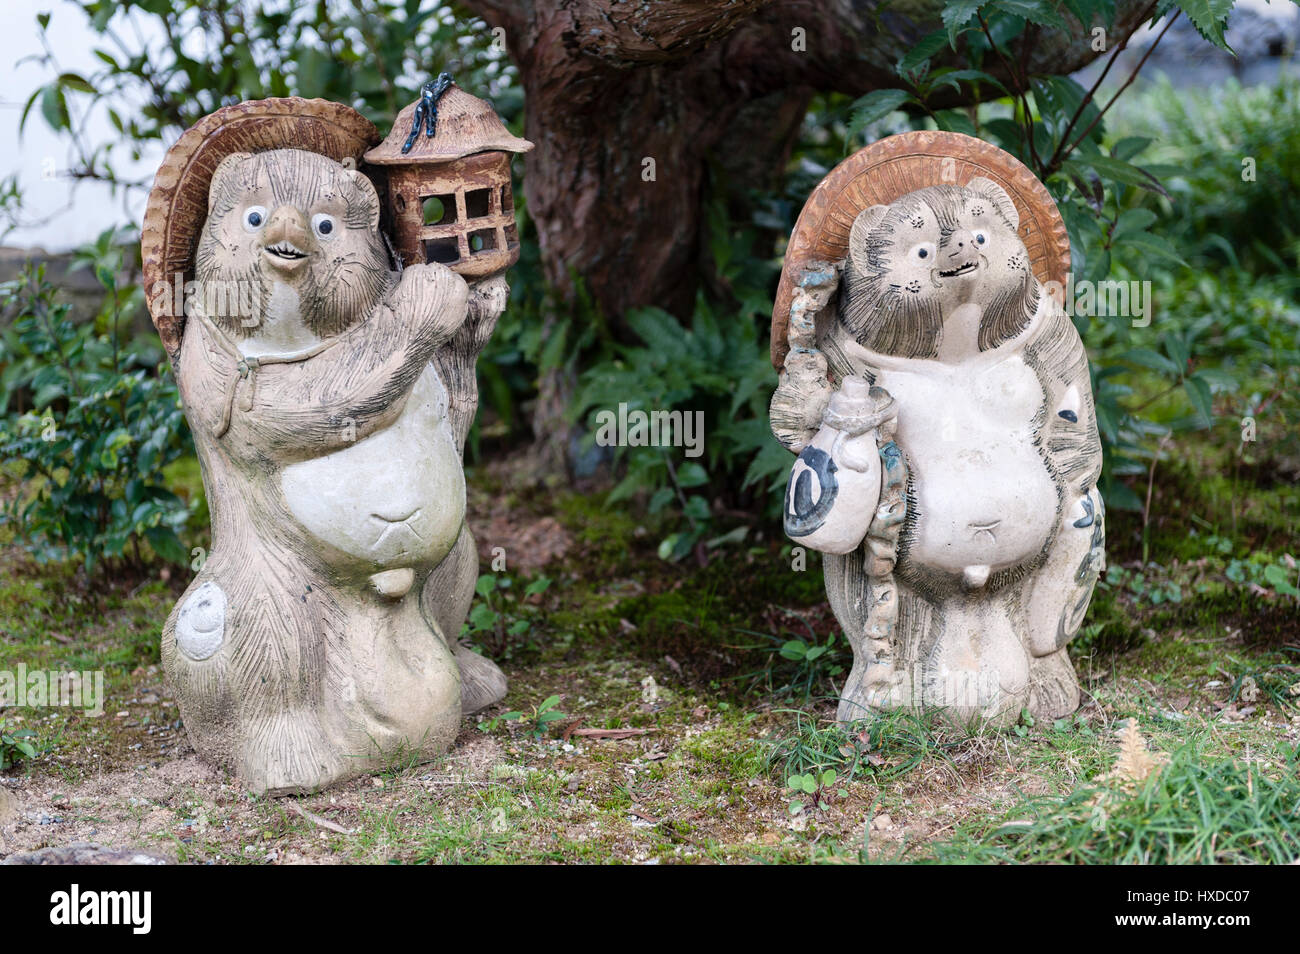 Kyoto, Japan. Figurines of Tanuki (lucky raccoons) at Shoden-ji, a Zen Buddhist temple on the edge of the city Stock Photo